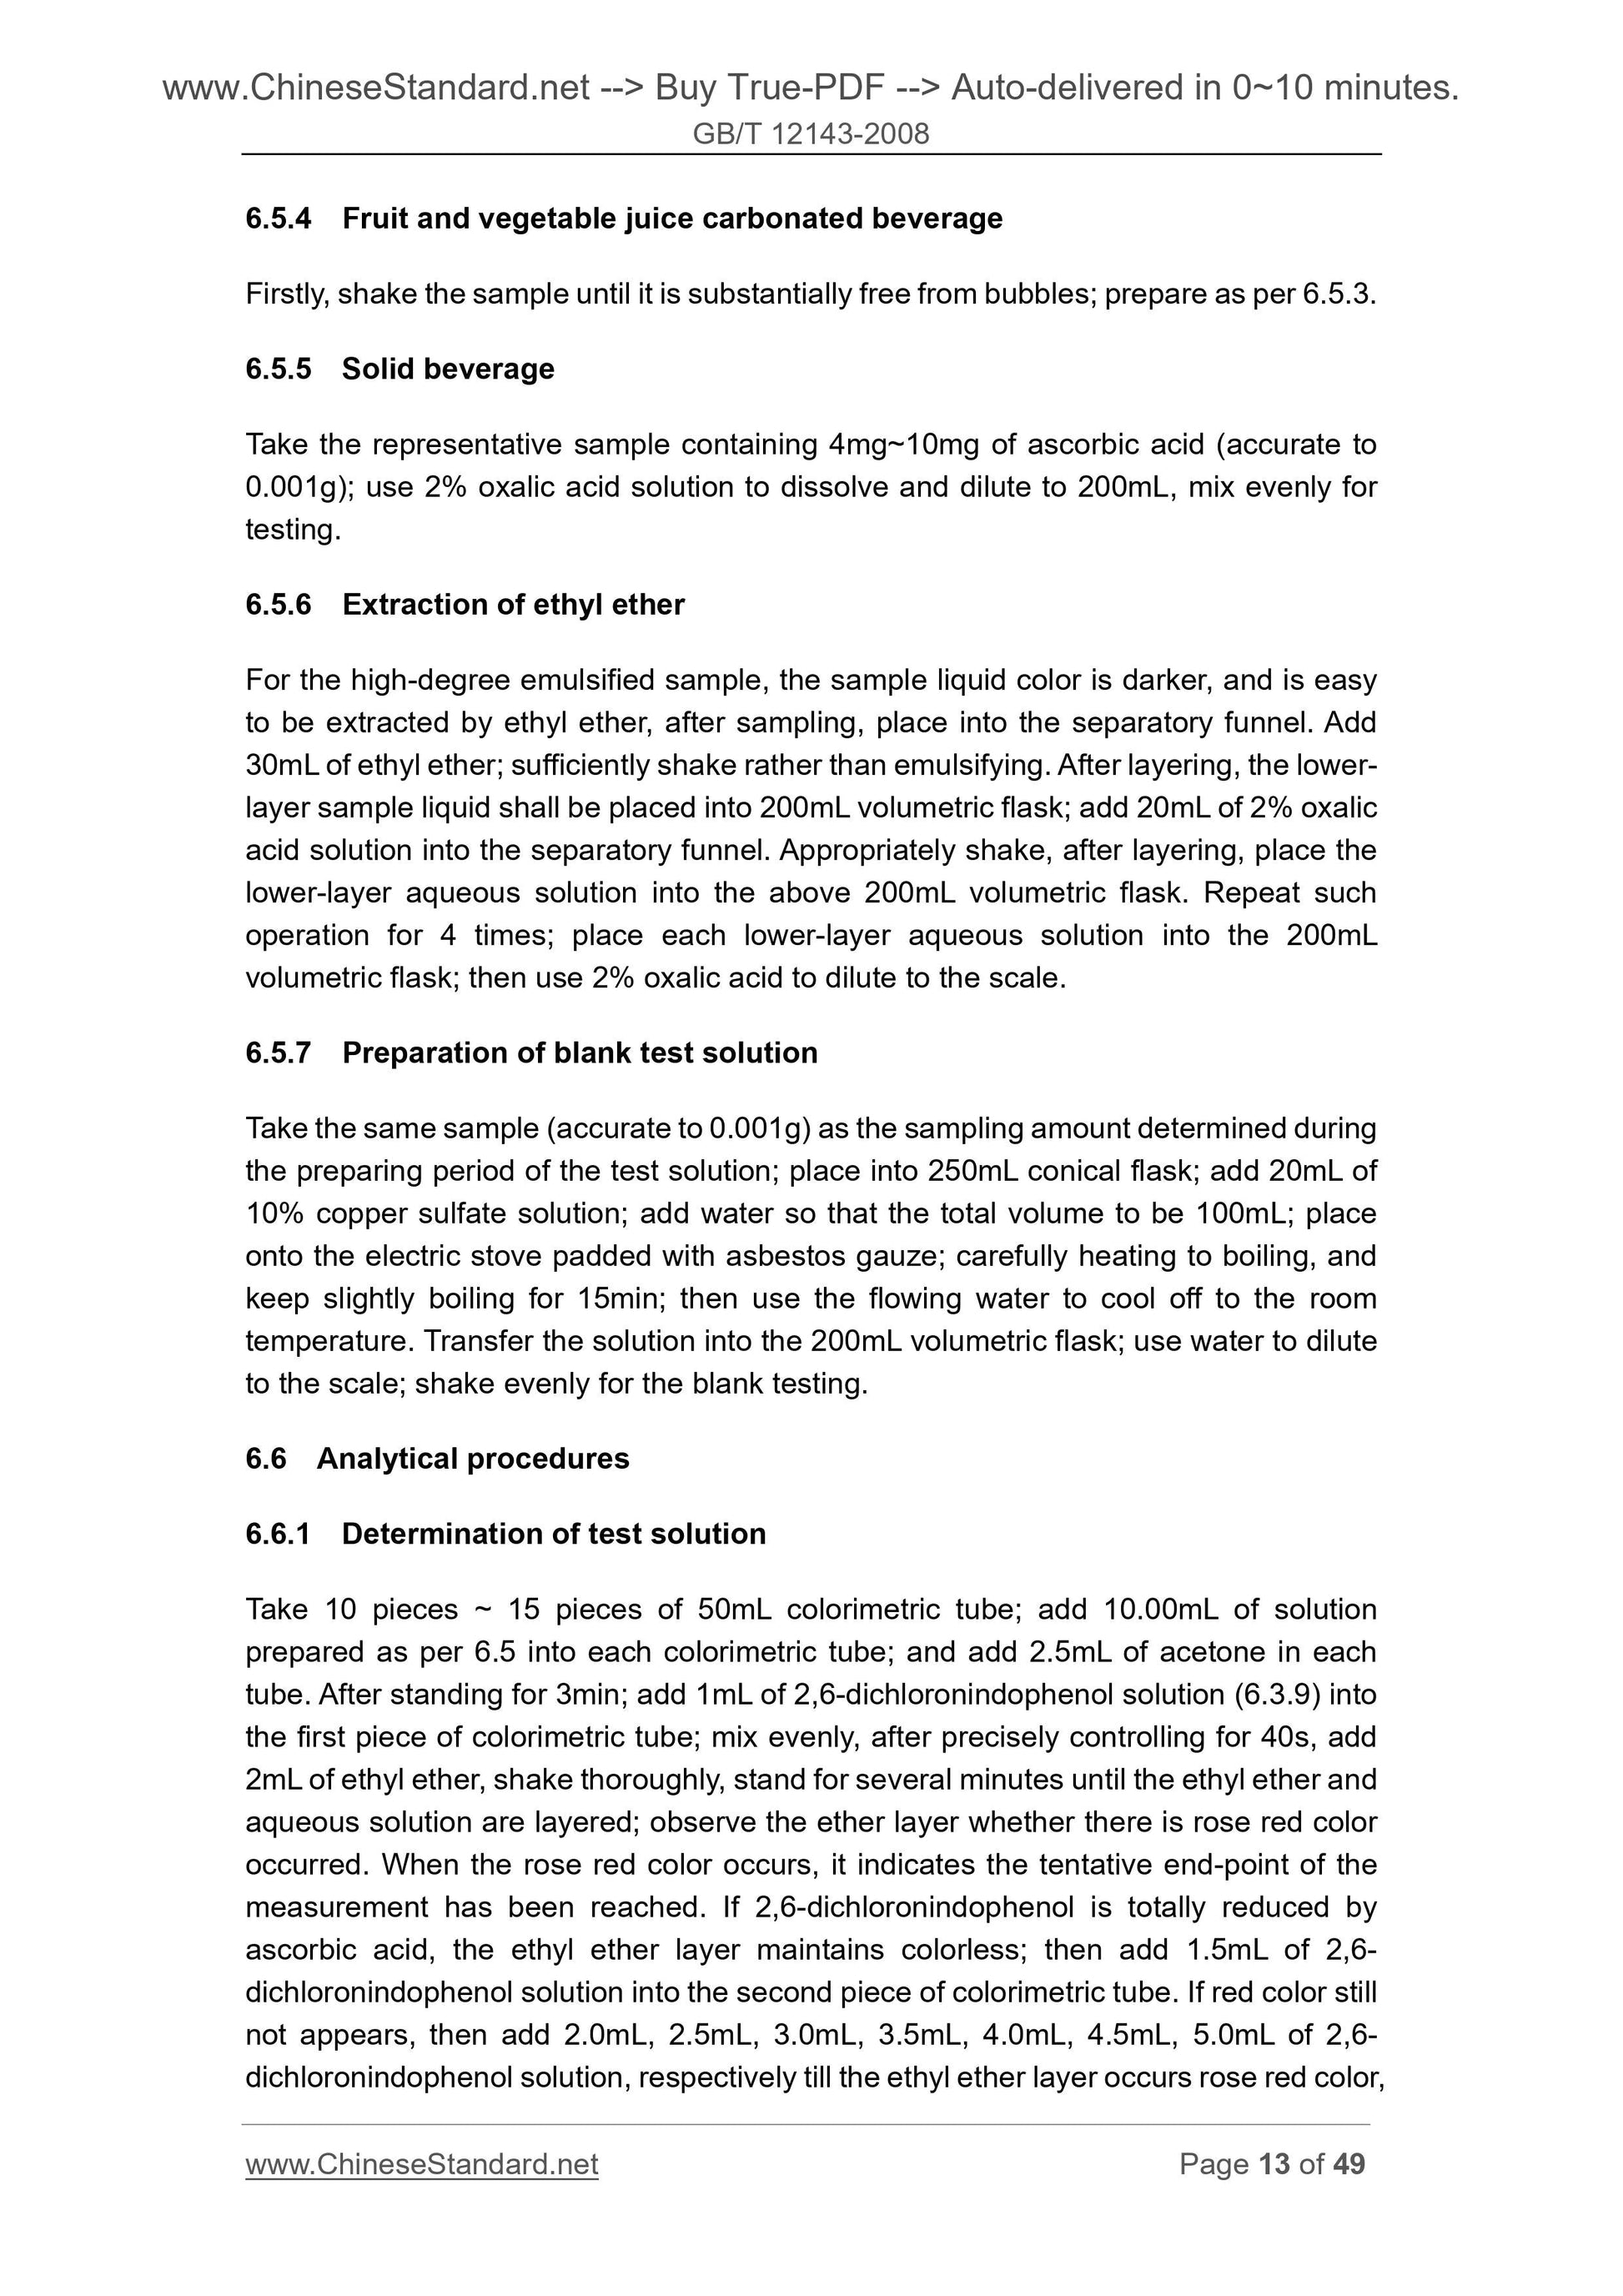 GB/T 12143-2008 Page 7